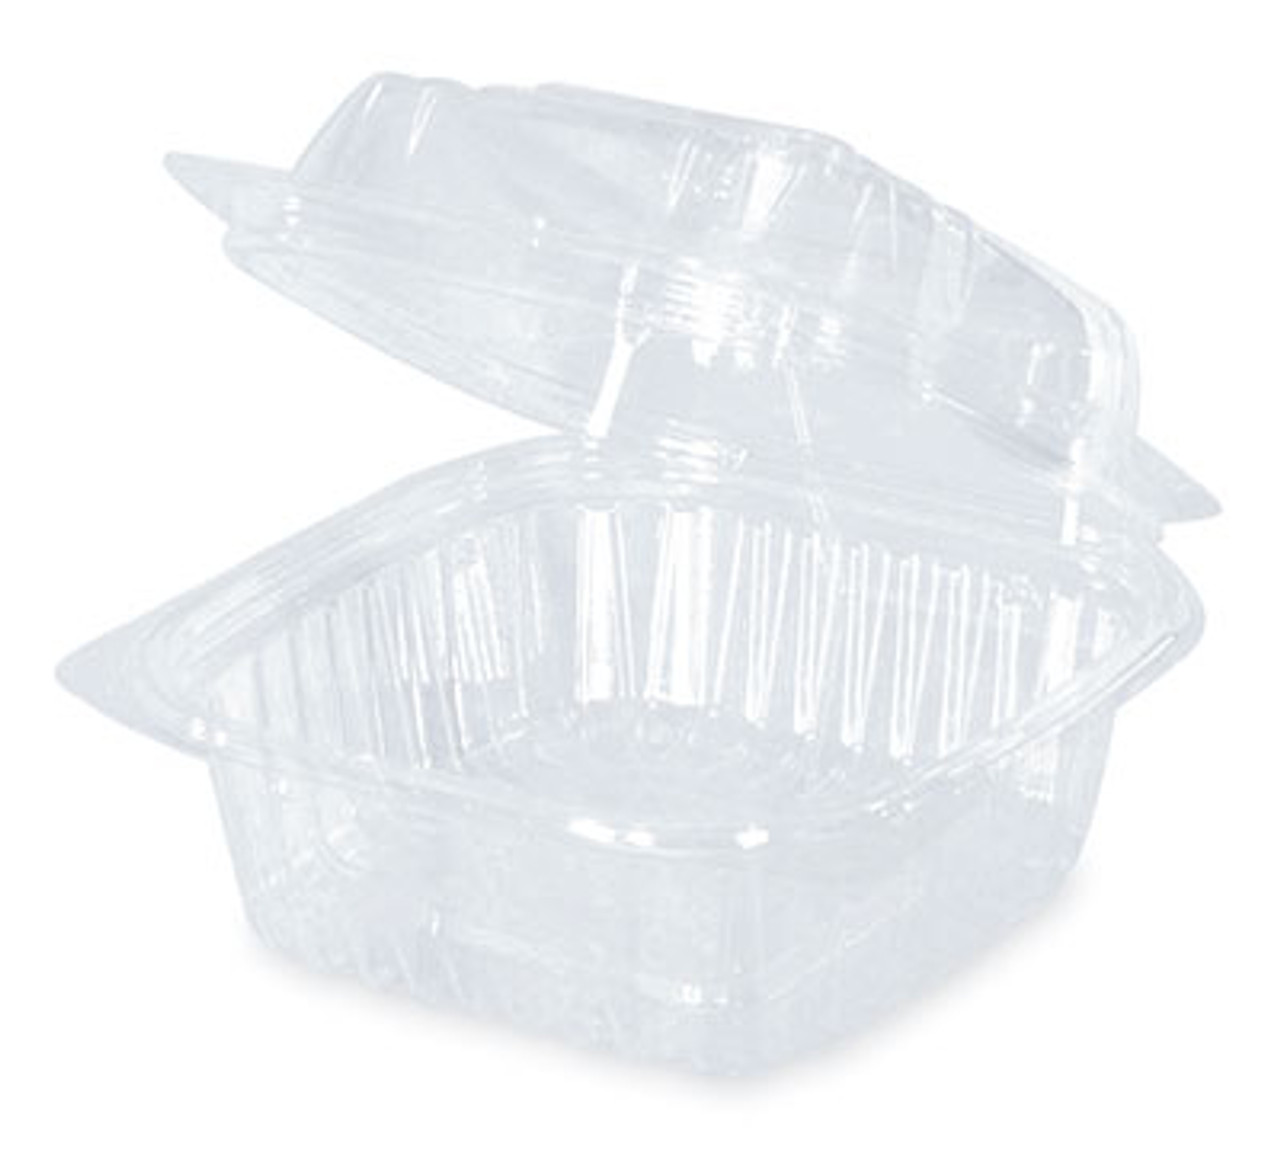 6" x 6" x 3" Compostable PLA Clamshell Food Container - Clear (1-Compartment) (Qty) 240 Items